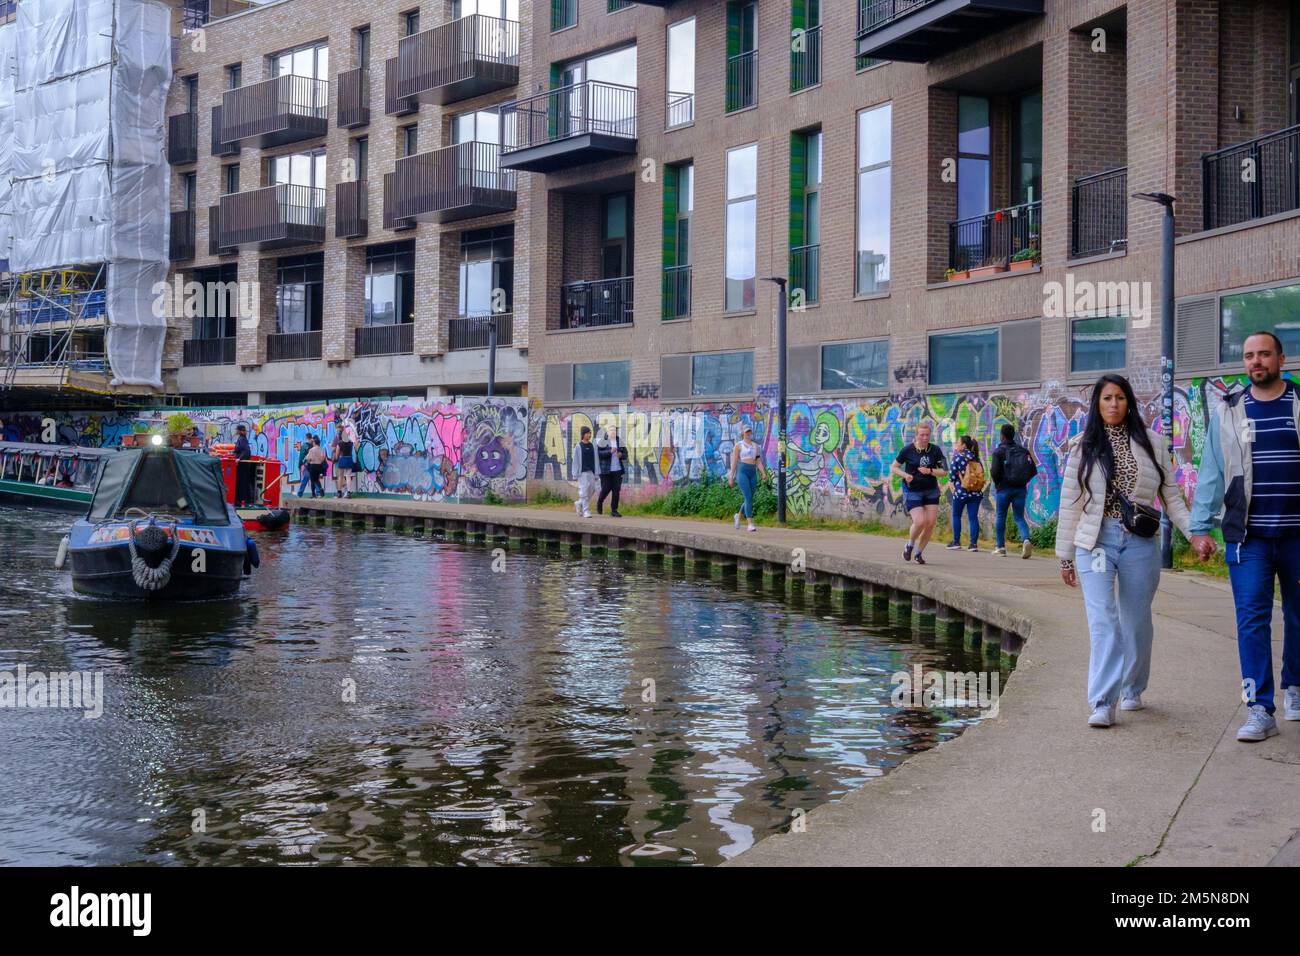 People walk & jog along Regents Canal towpath near Camden Town, with walls covered in graffiti and narrow boats in the water. Stock Photo